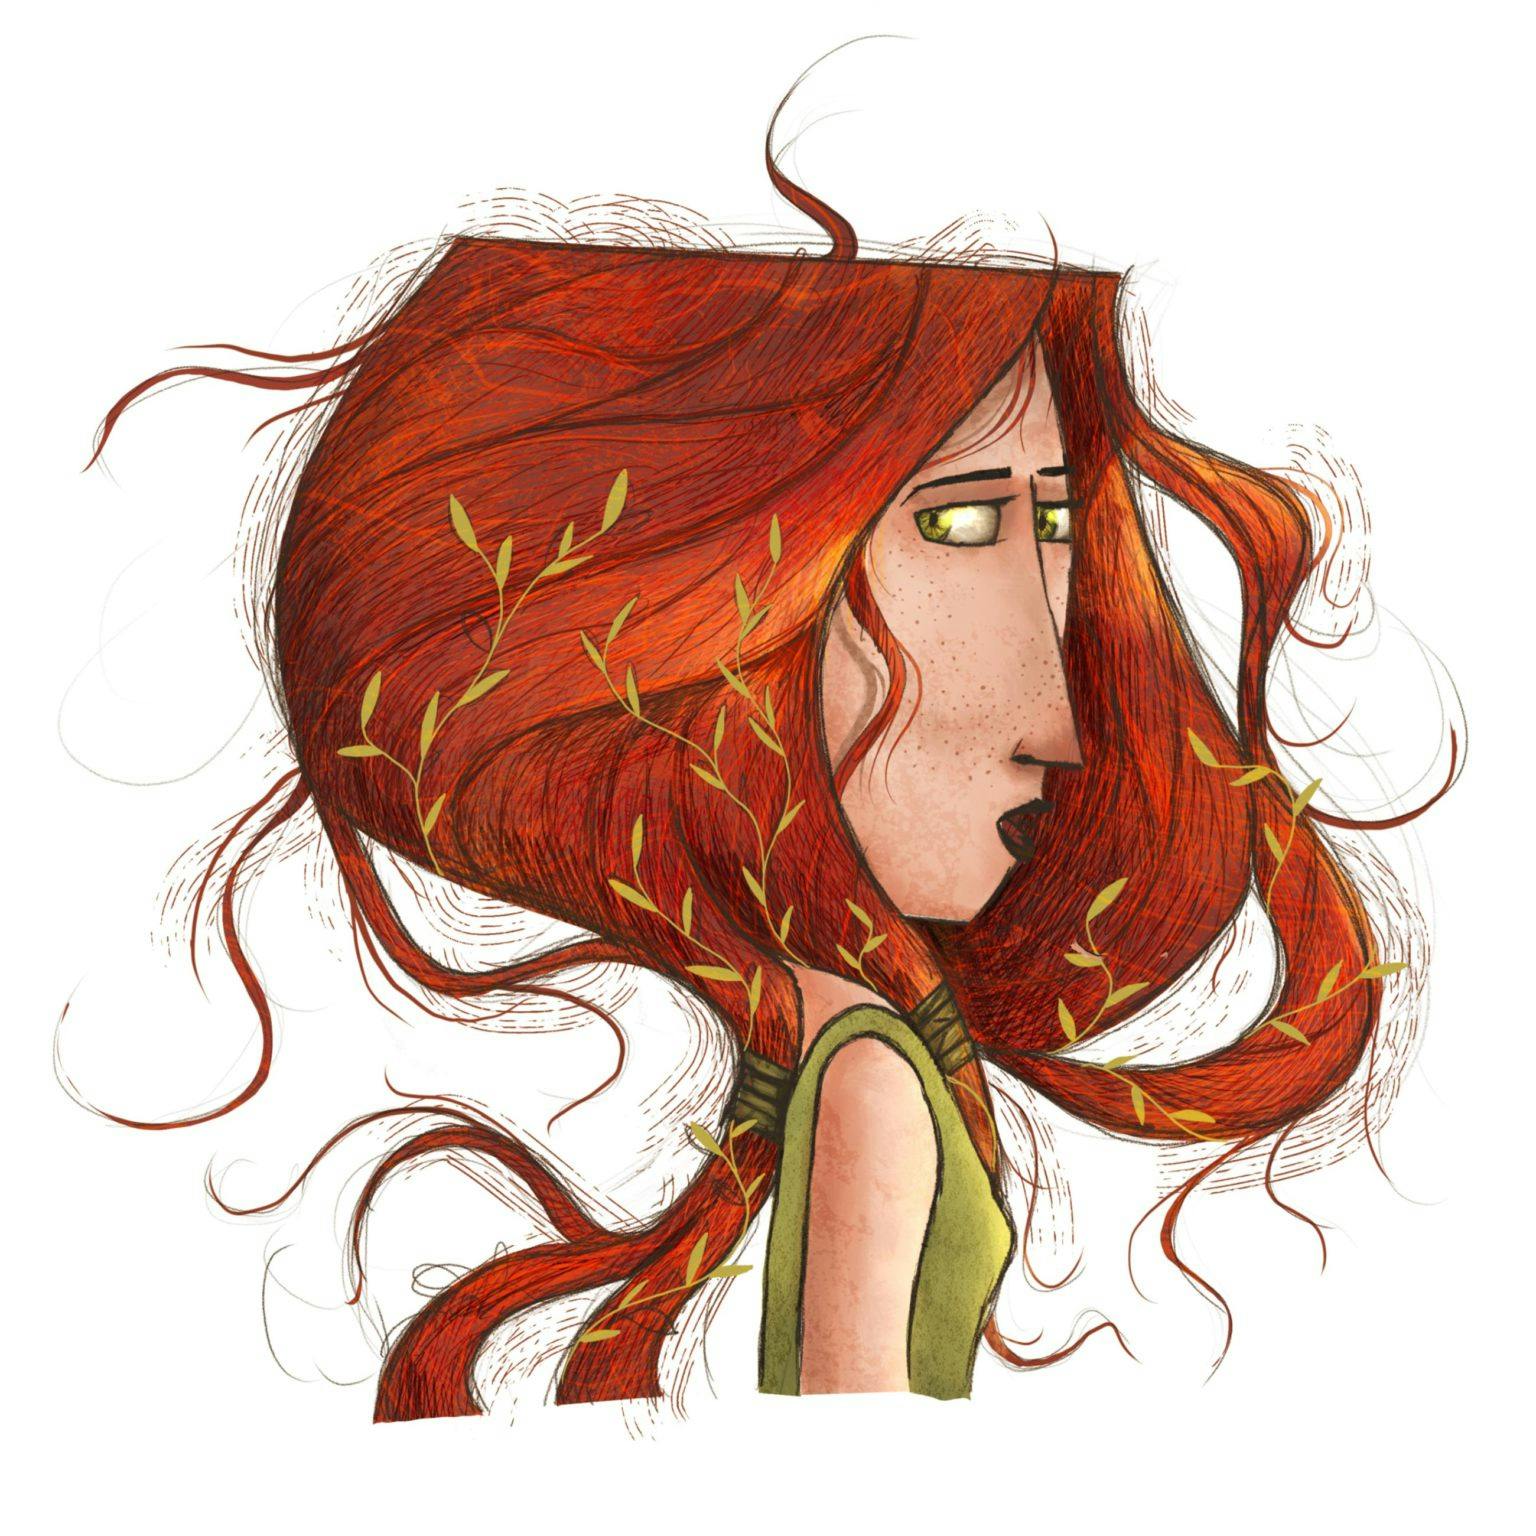 A red headed woman